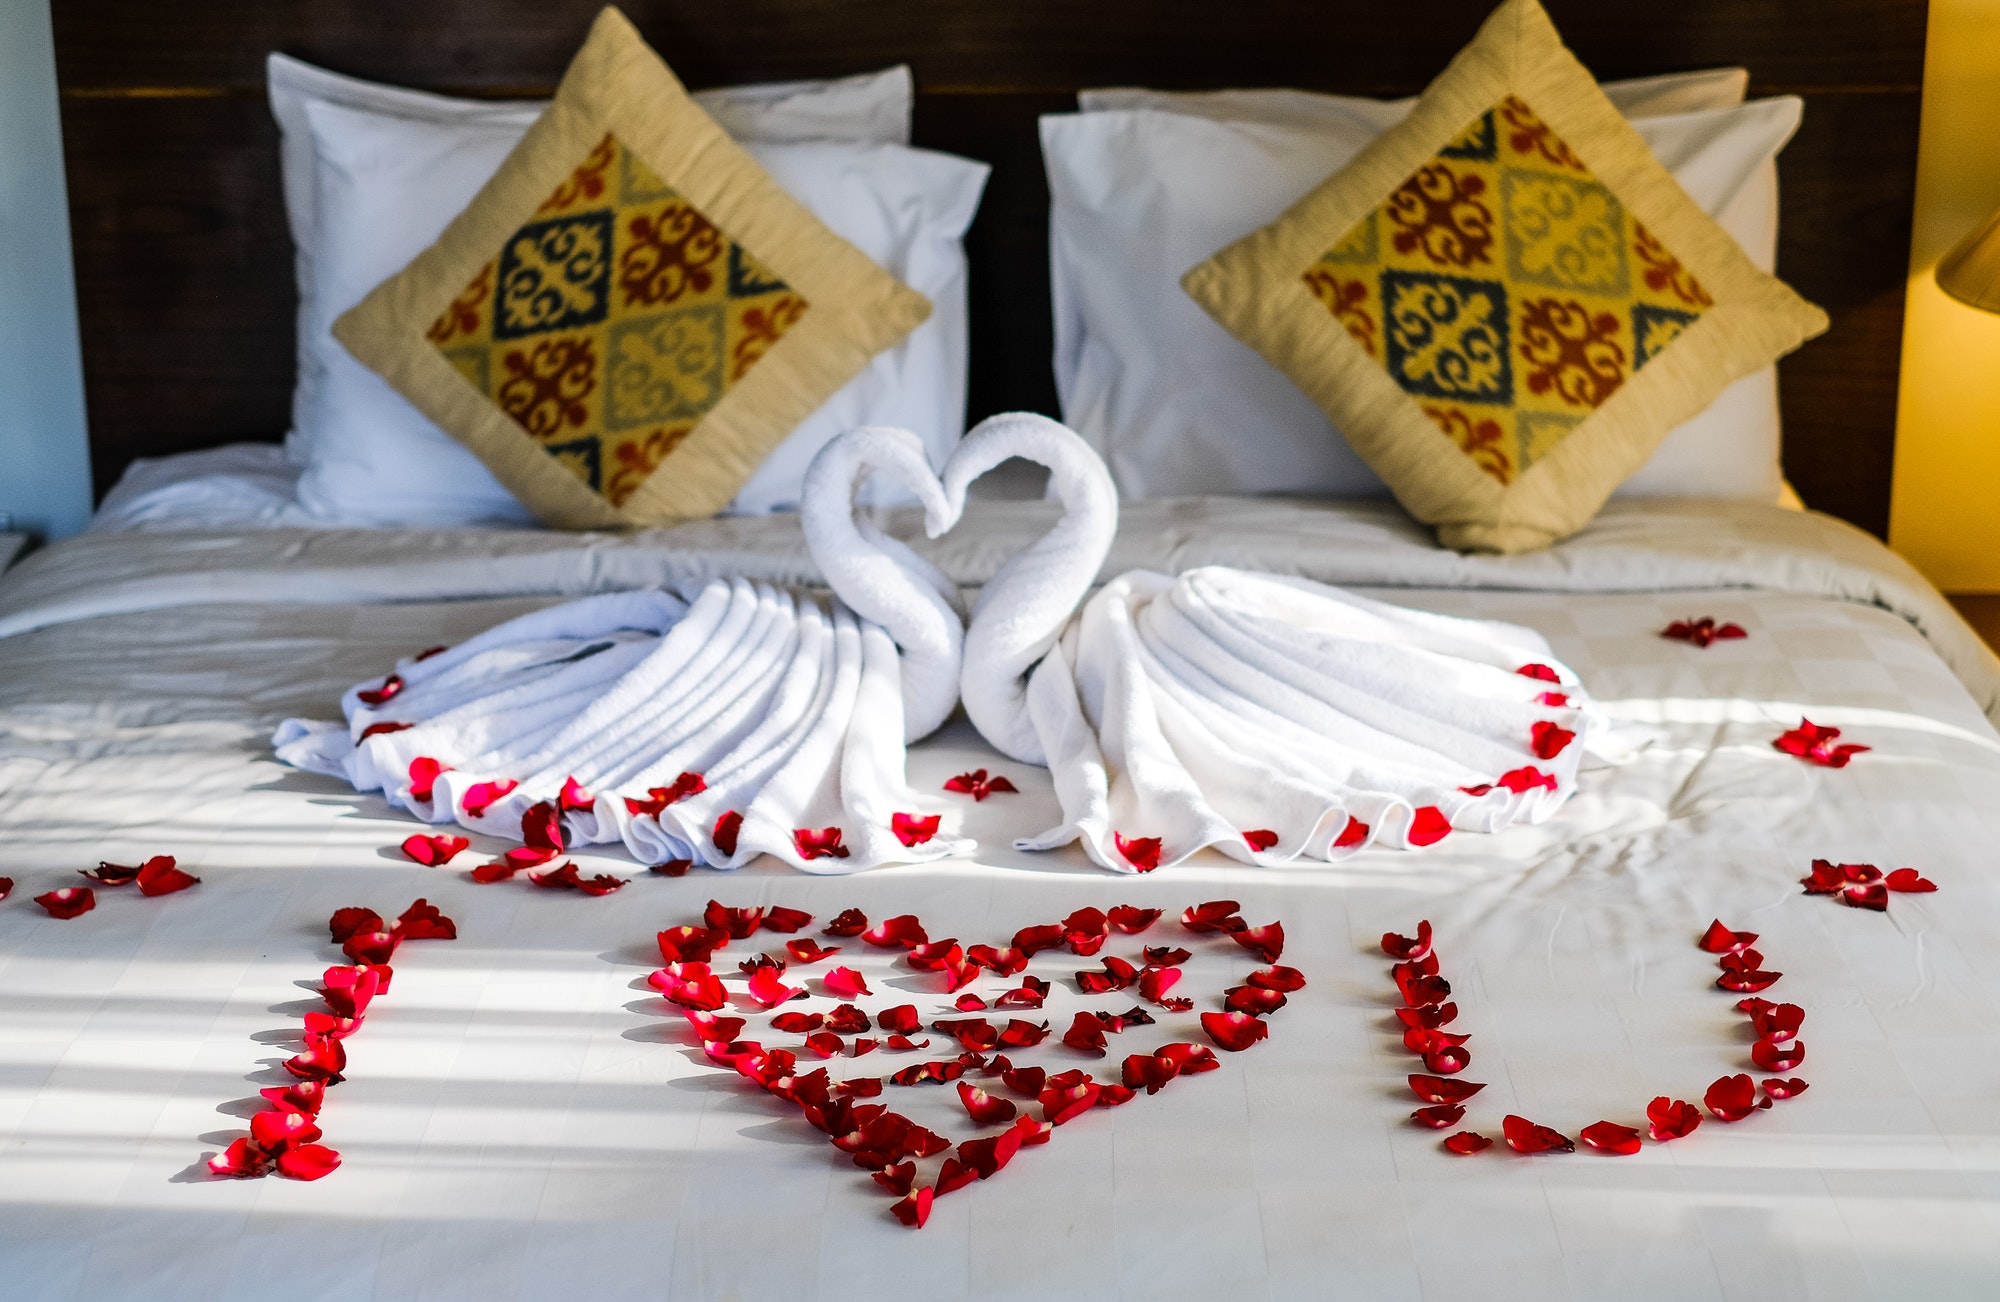 Decorated towels on the hotel bed, hotel room